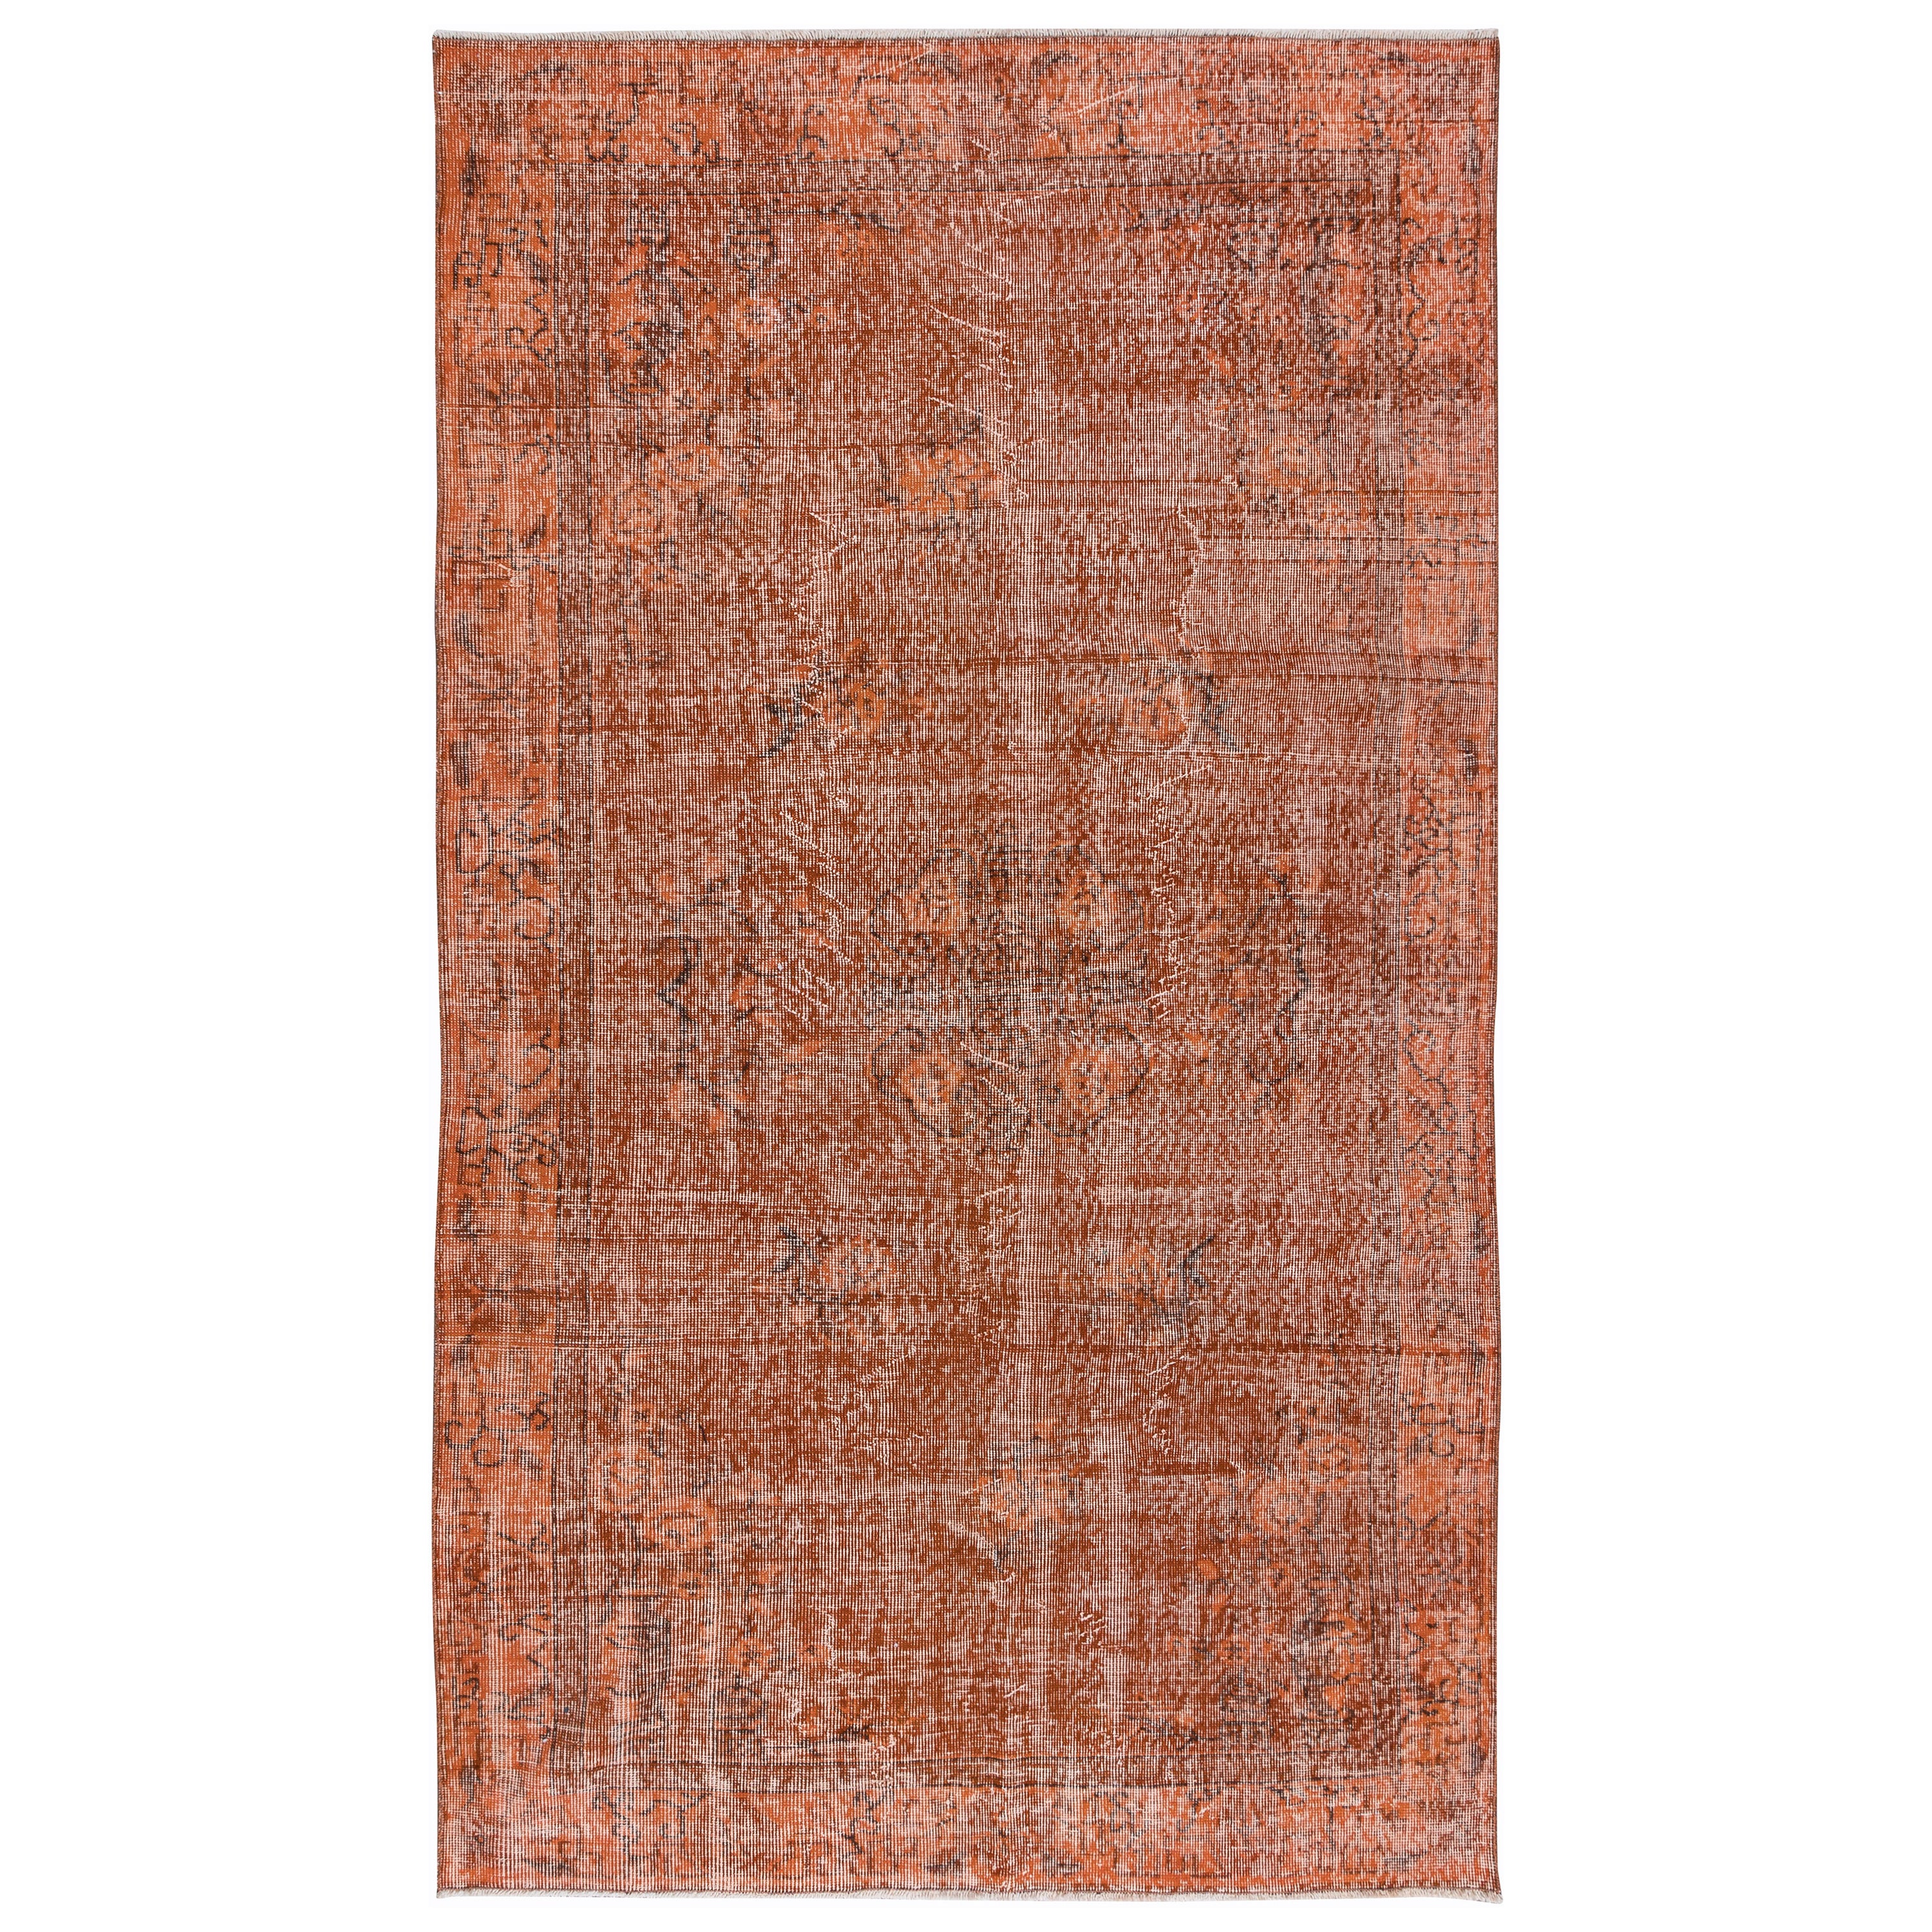 5x8.6 Ft Handmade Carpet with Art Deco Chinese Design, Orange Area Rug For Sale